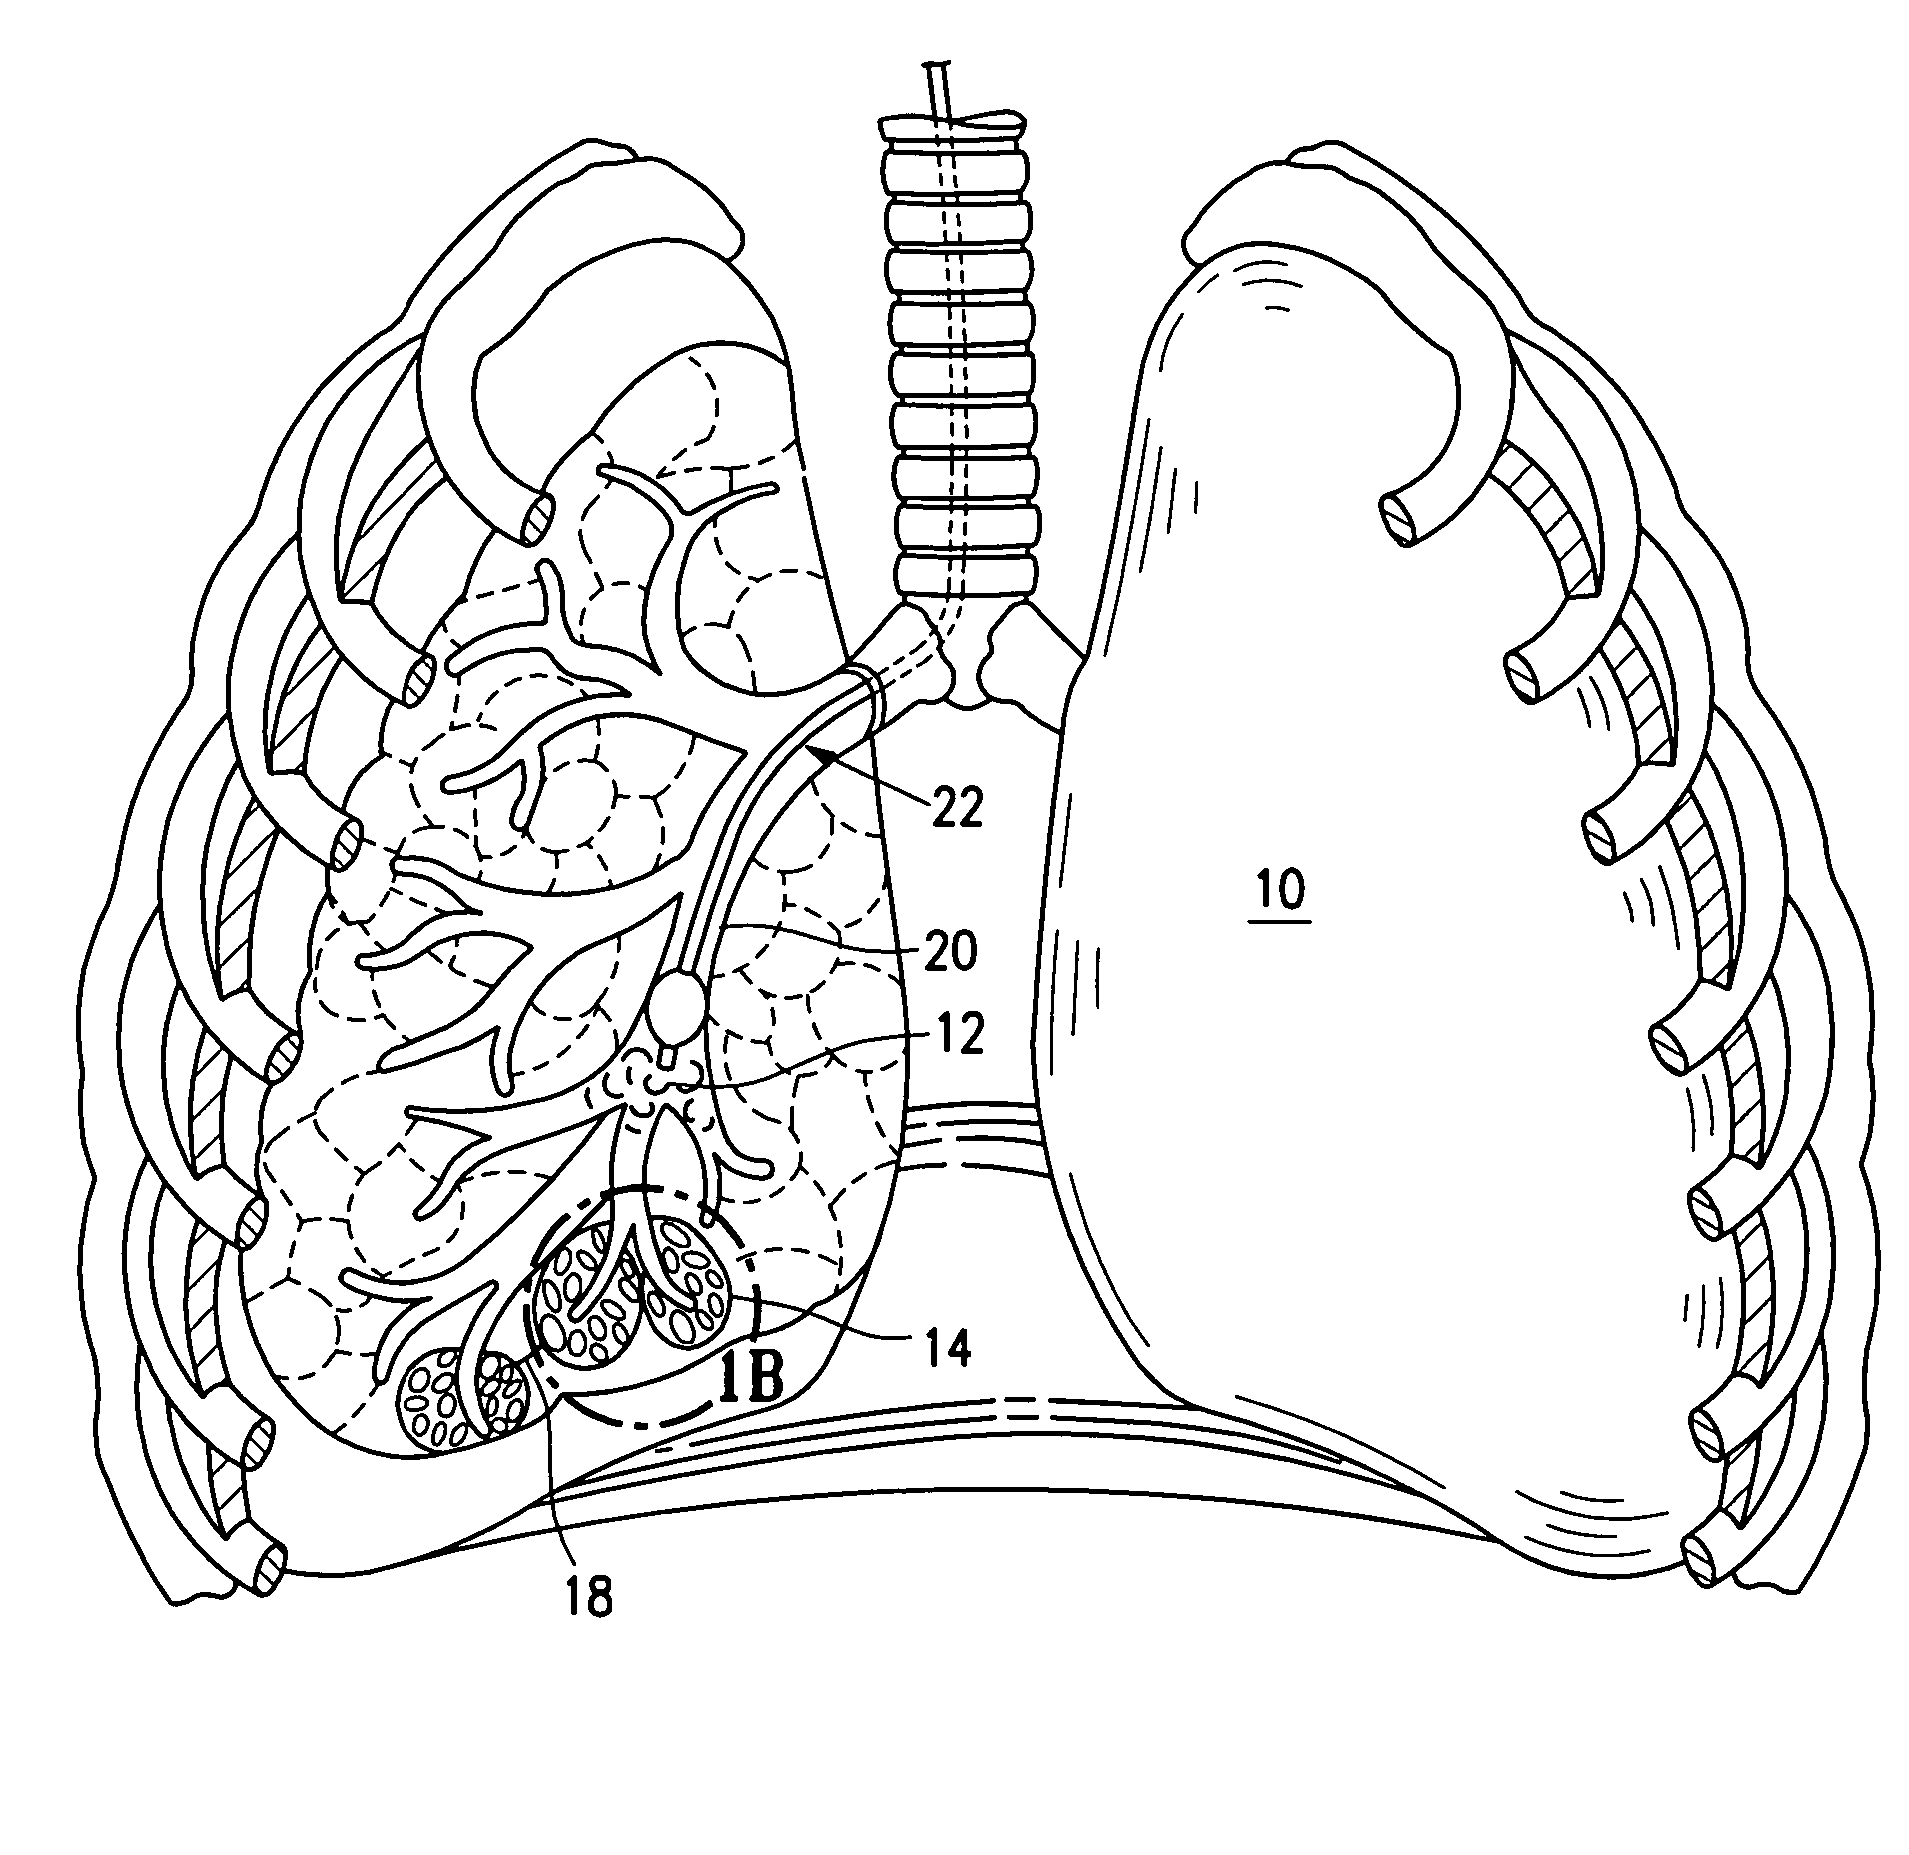 Device and method for lung treatment